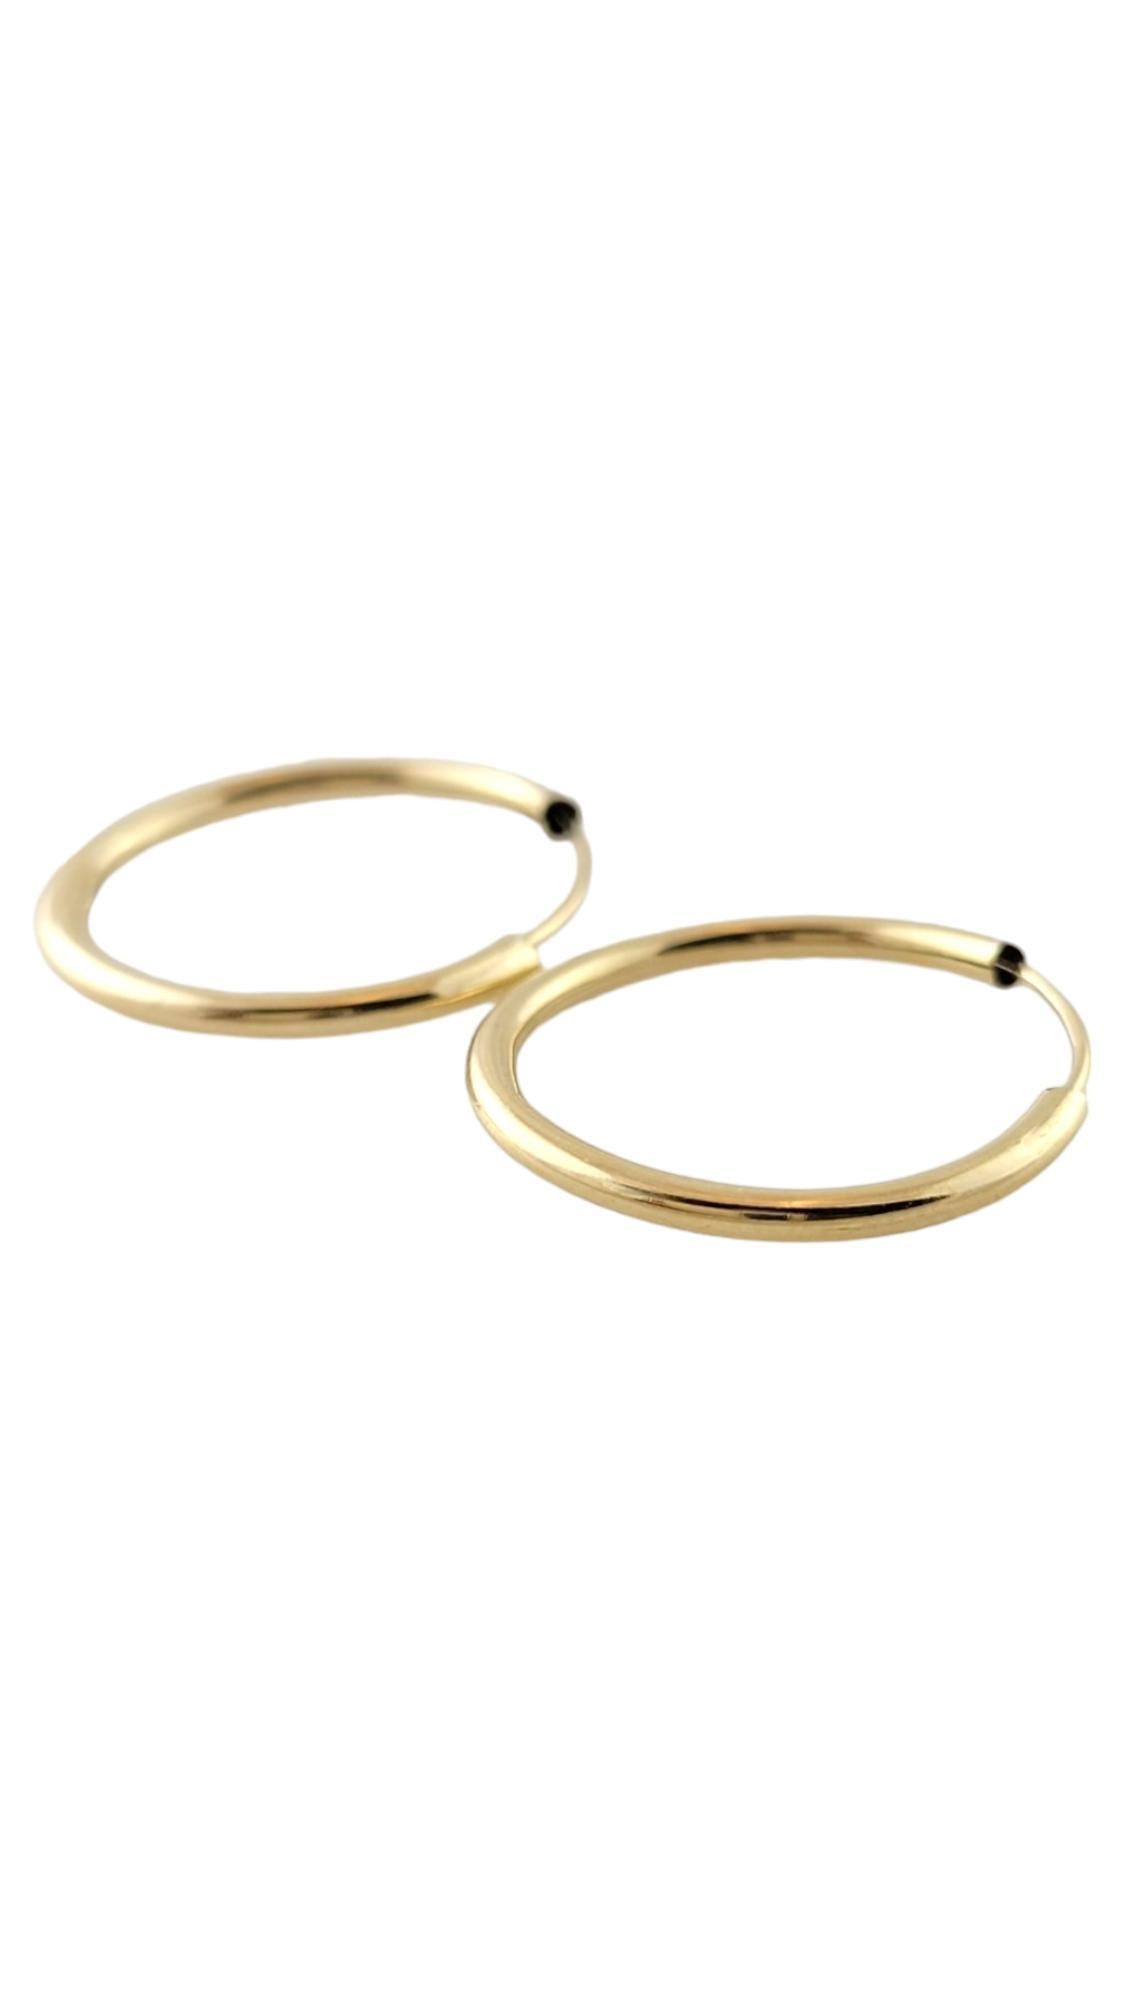 14K Yellow Gold Circle Hoop Earrings #16863 In Good Condition For Sale In Washington Depot, CT